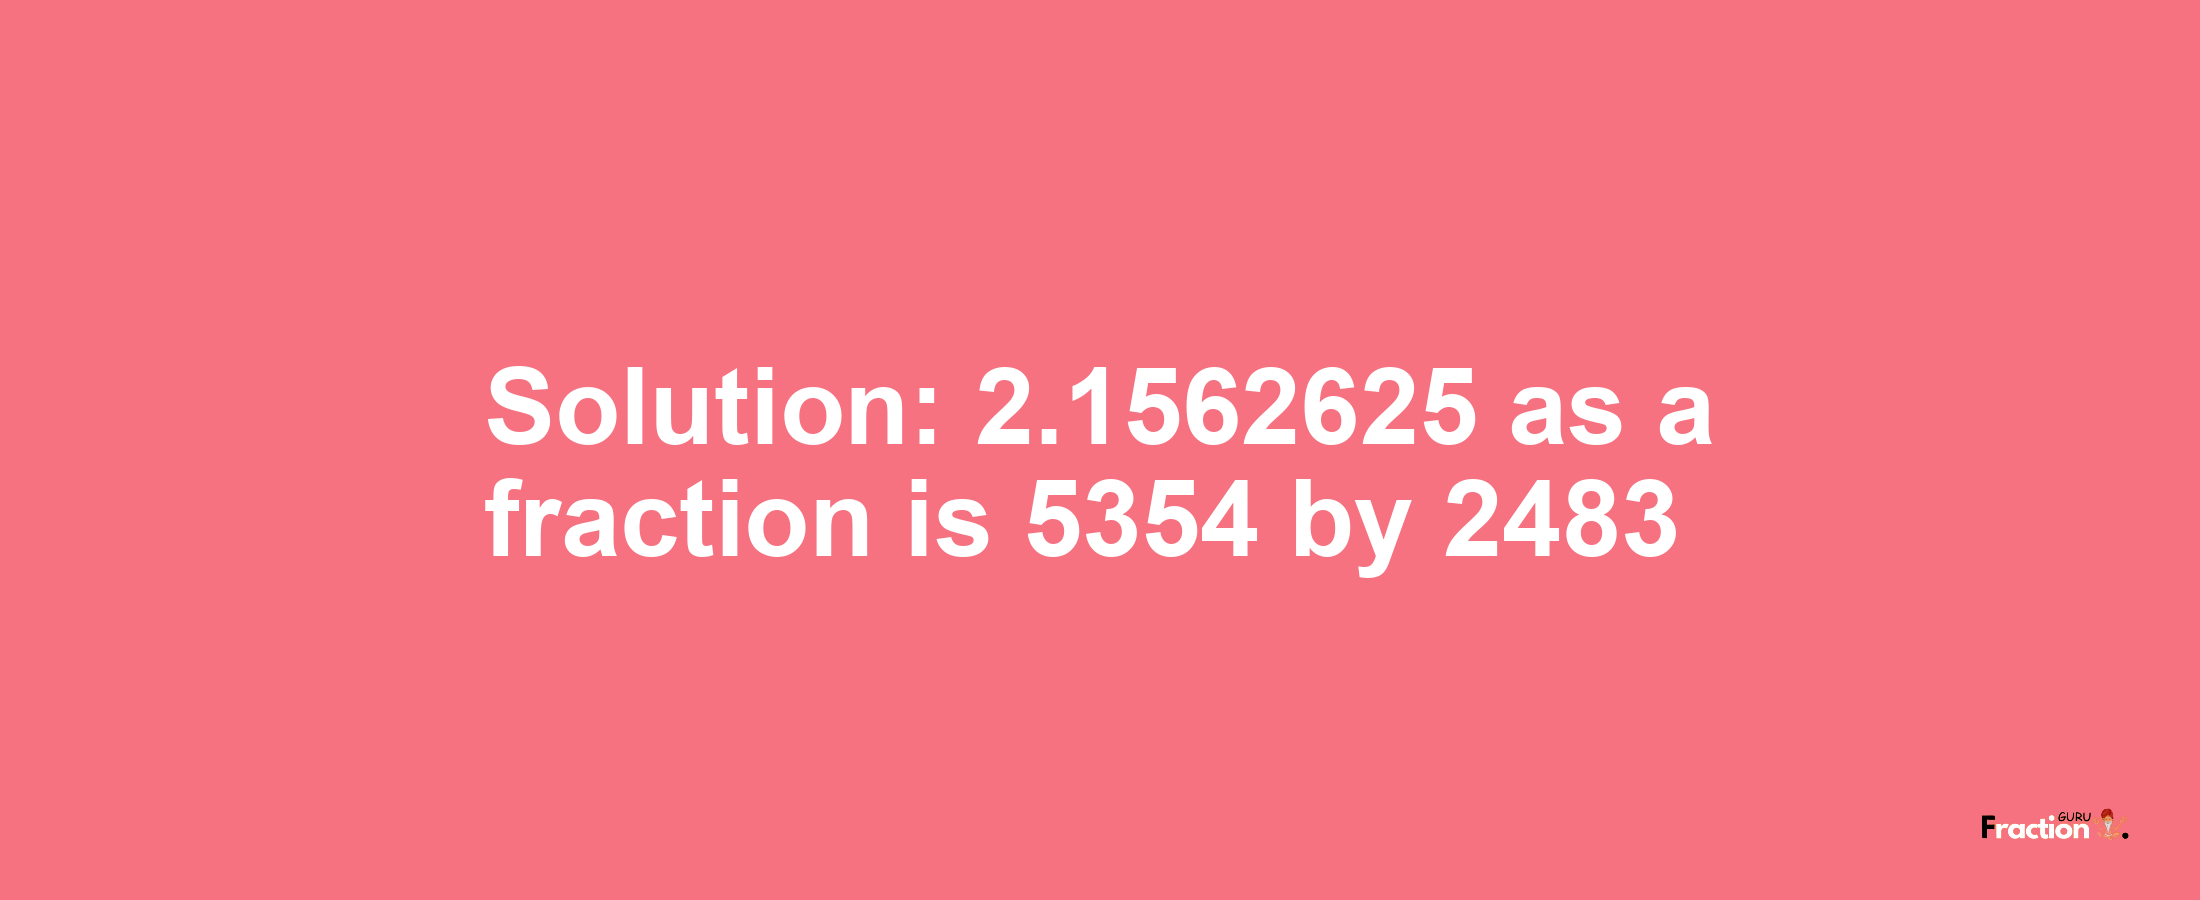 Solution:2.1562625 as a fraction is 5354/2483